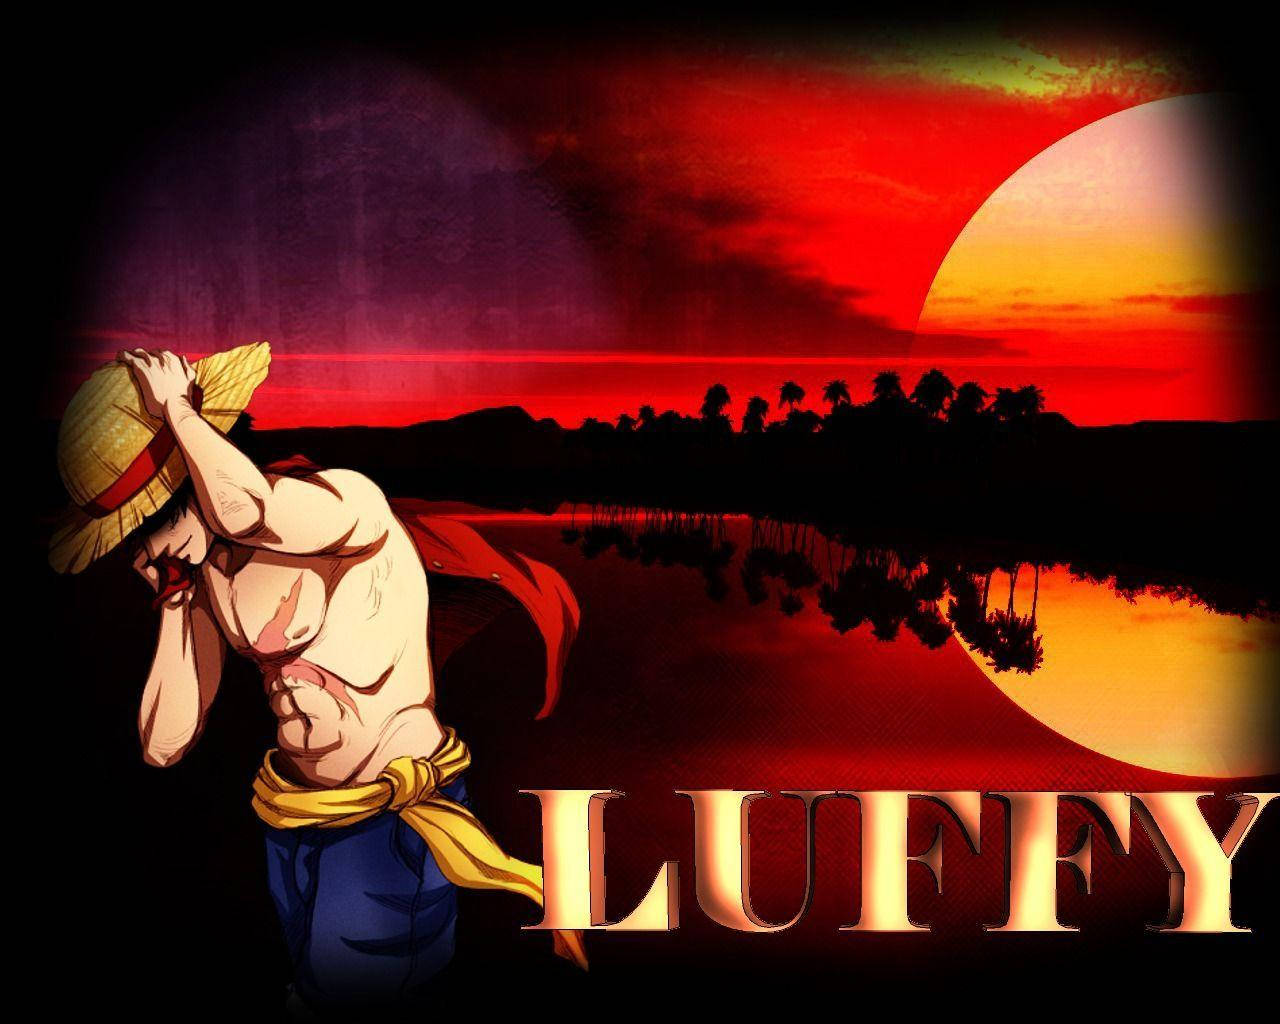 Luffy Red Sky Poster Wallpaper